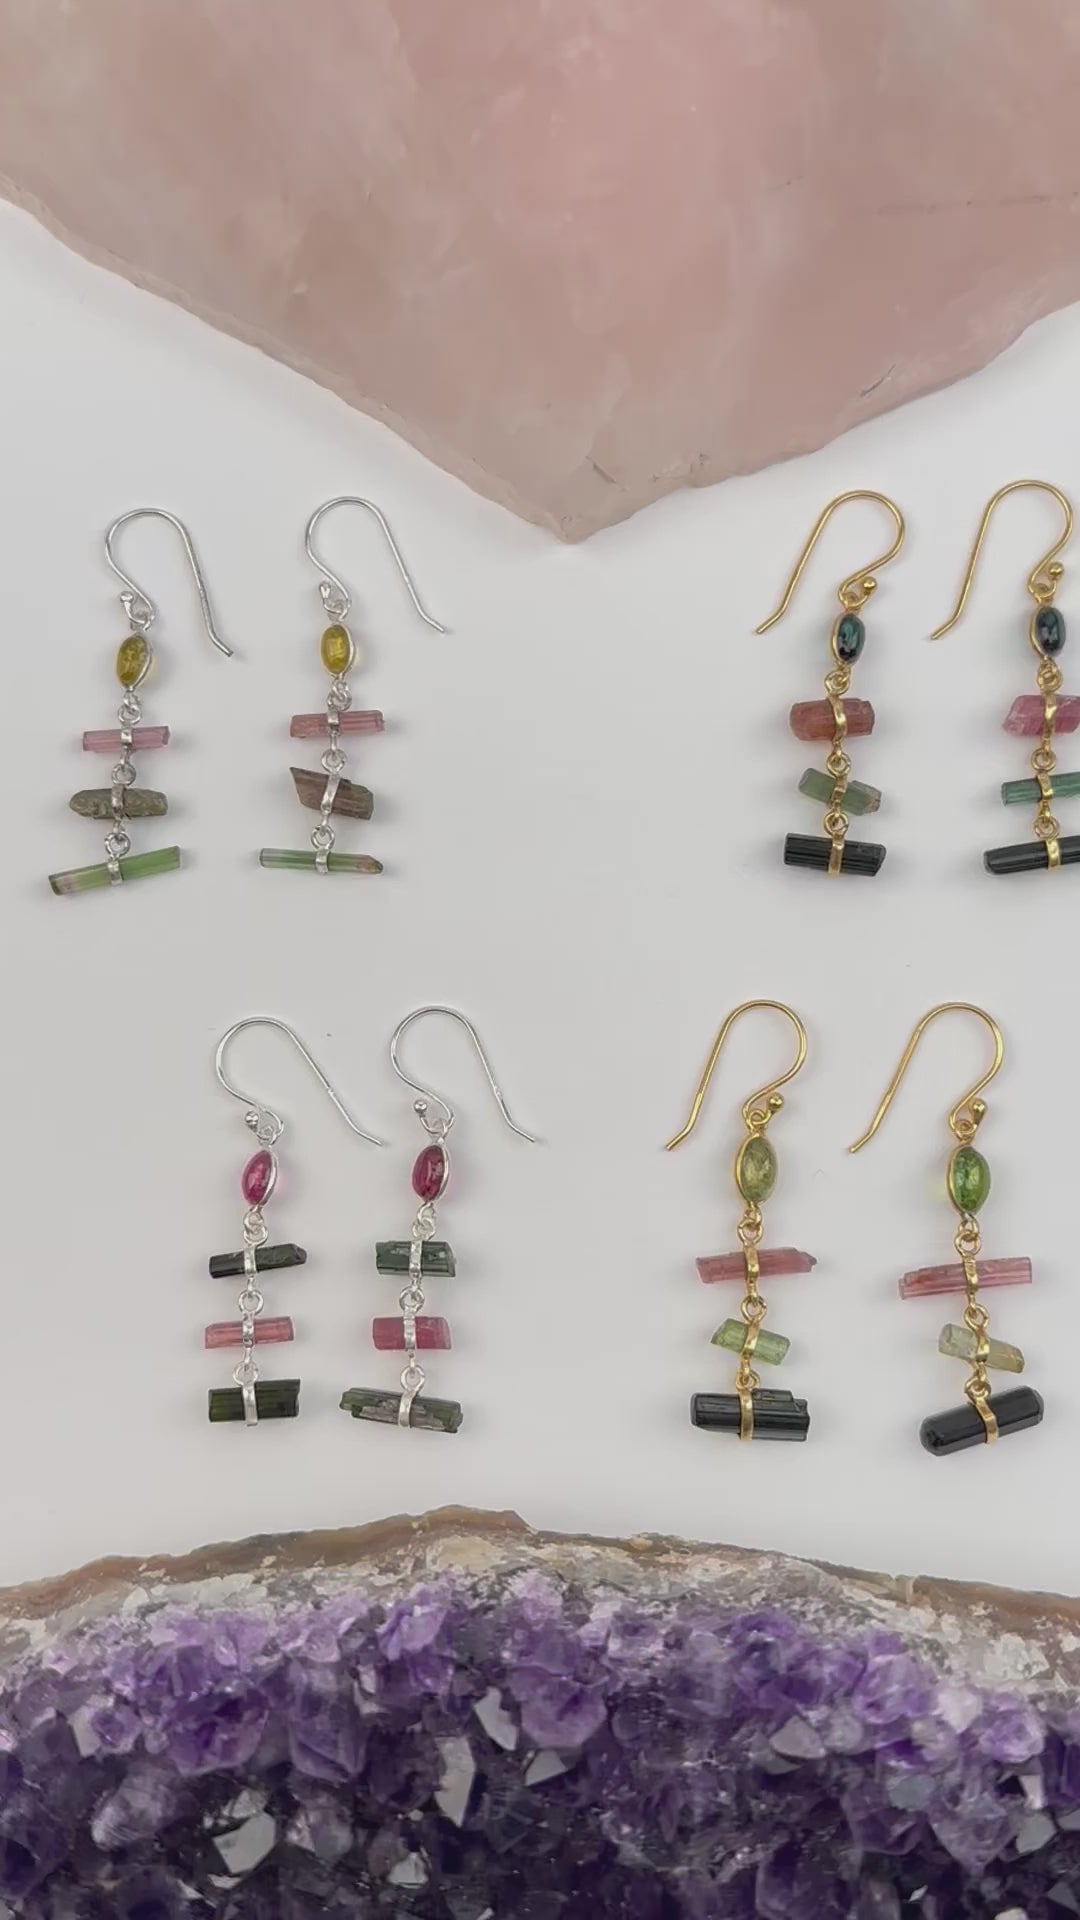 Watermelon Tourmaline Earrings - Sterling Silver or Gold over Sterling Silver -